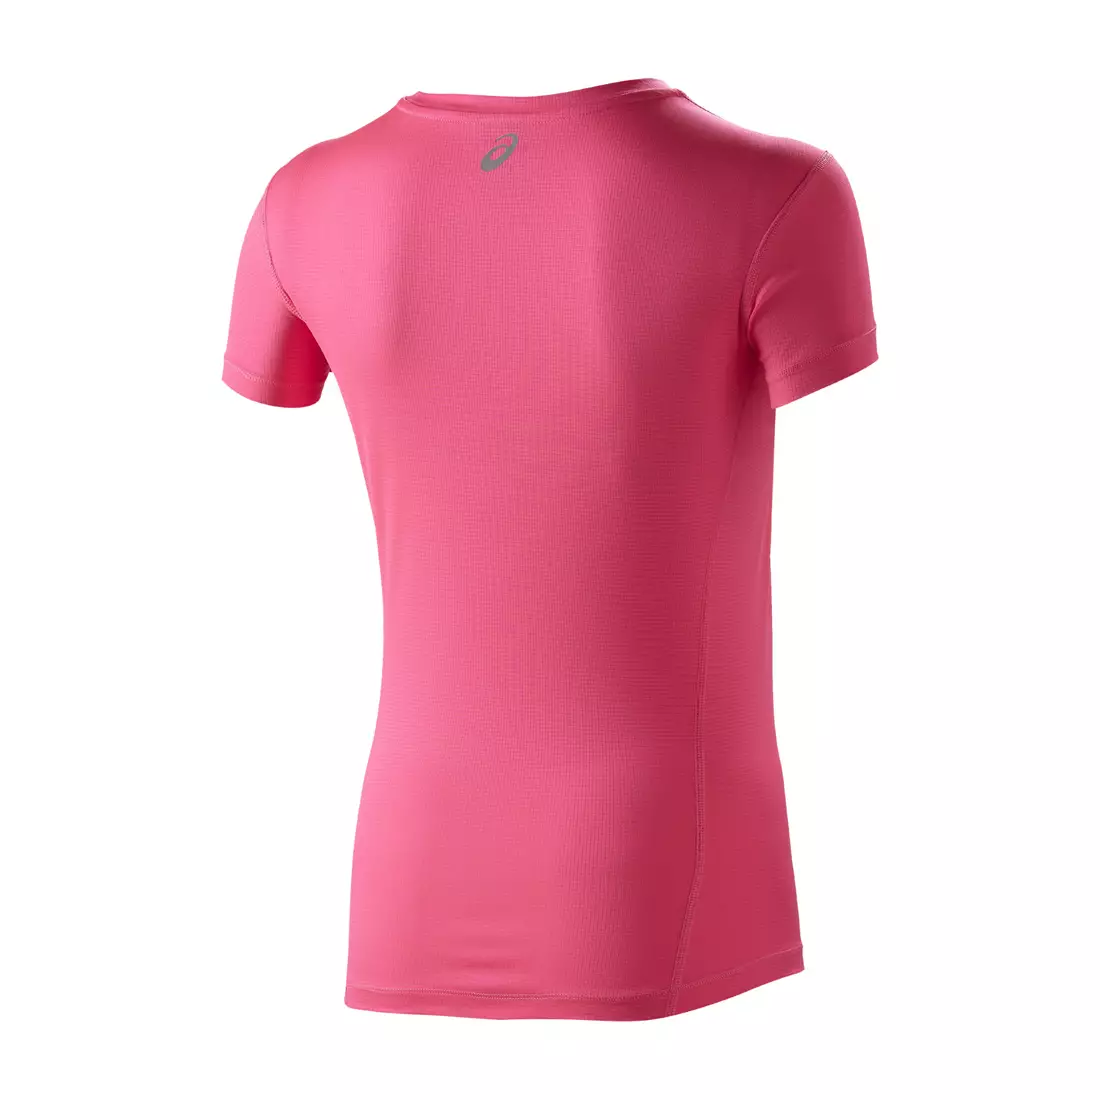 ASICS 110423-0273 GRAPHIC SS TOP - women's running T-shirt, color: Pink